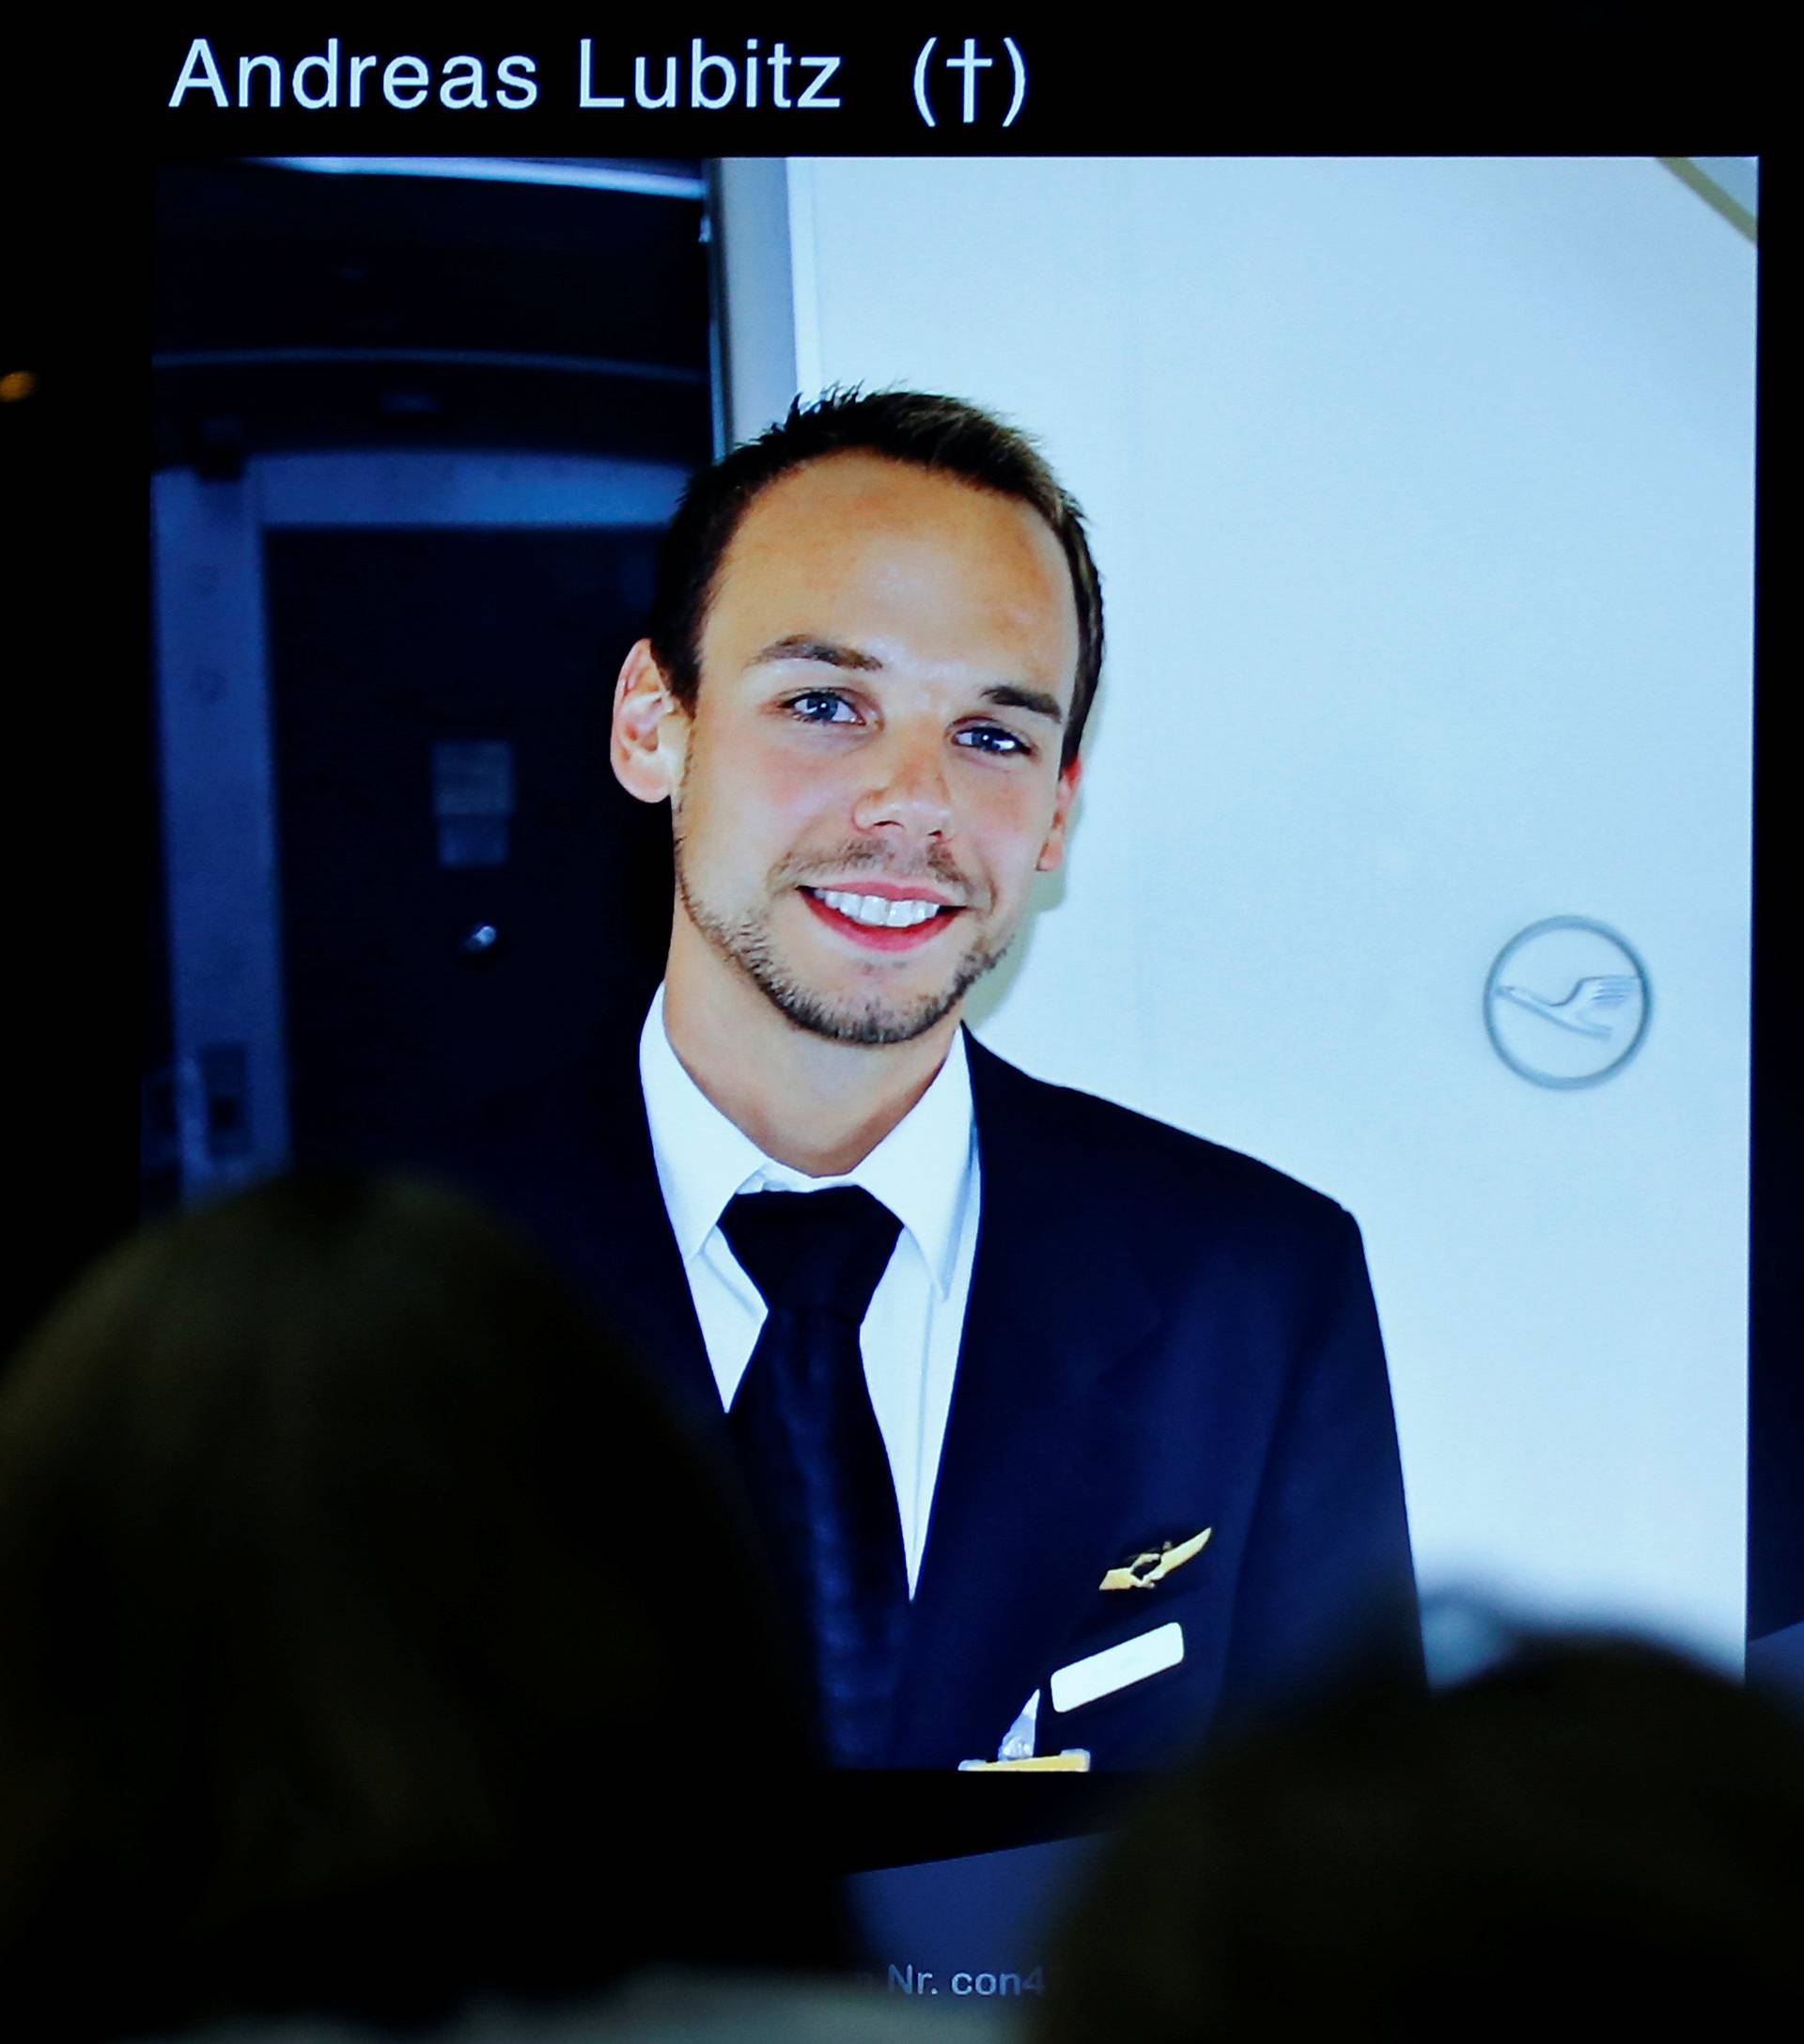 A screen shows a picture of Andreas Lubitz during news conference of Guenter Lubitz in Berlin